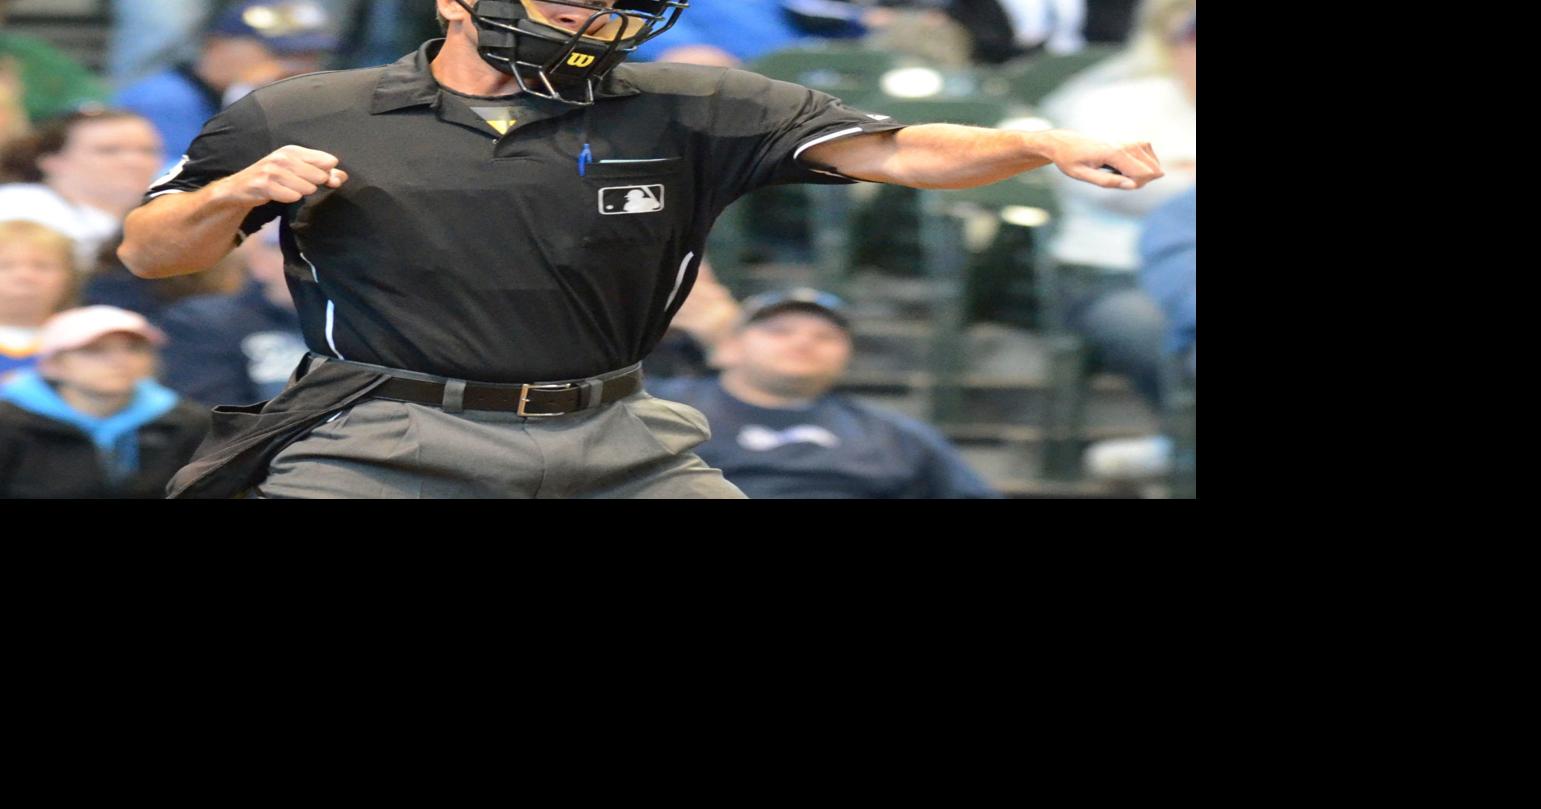 BenFred: MLB umpires, you're out. It's time for an automated